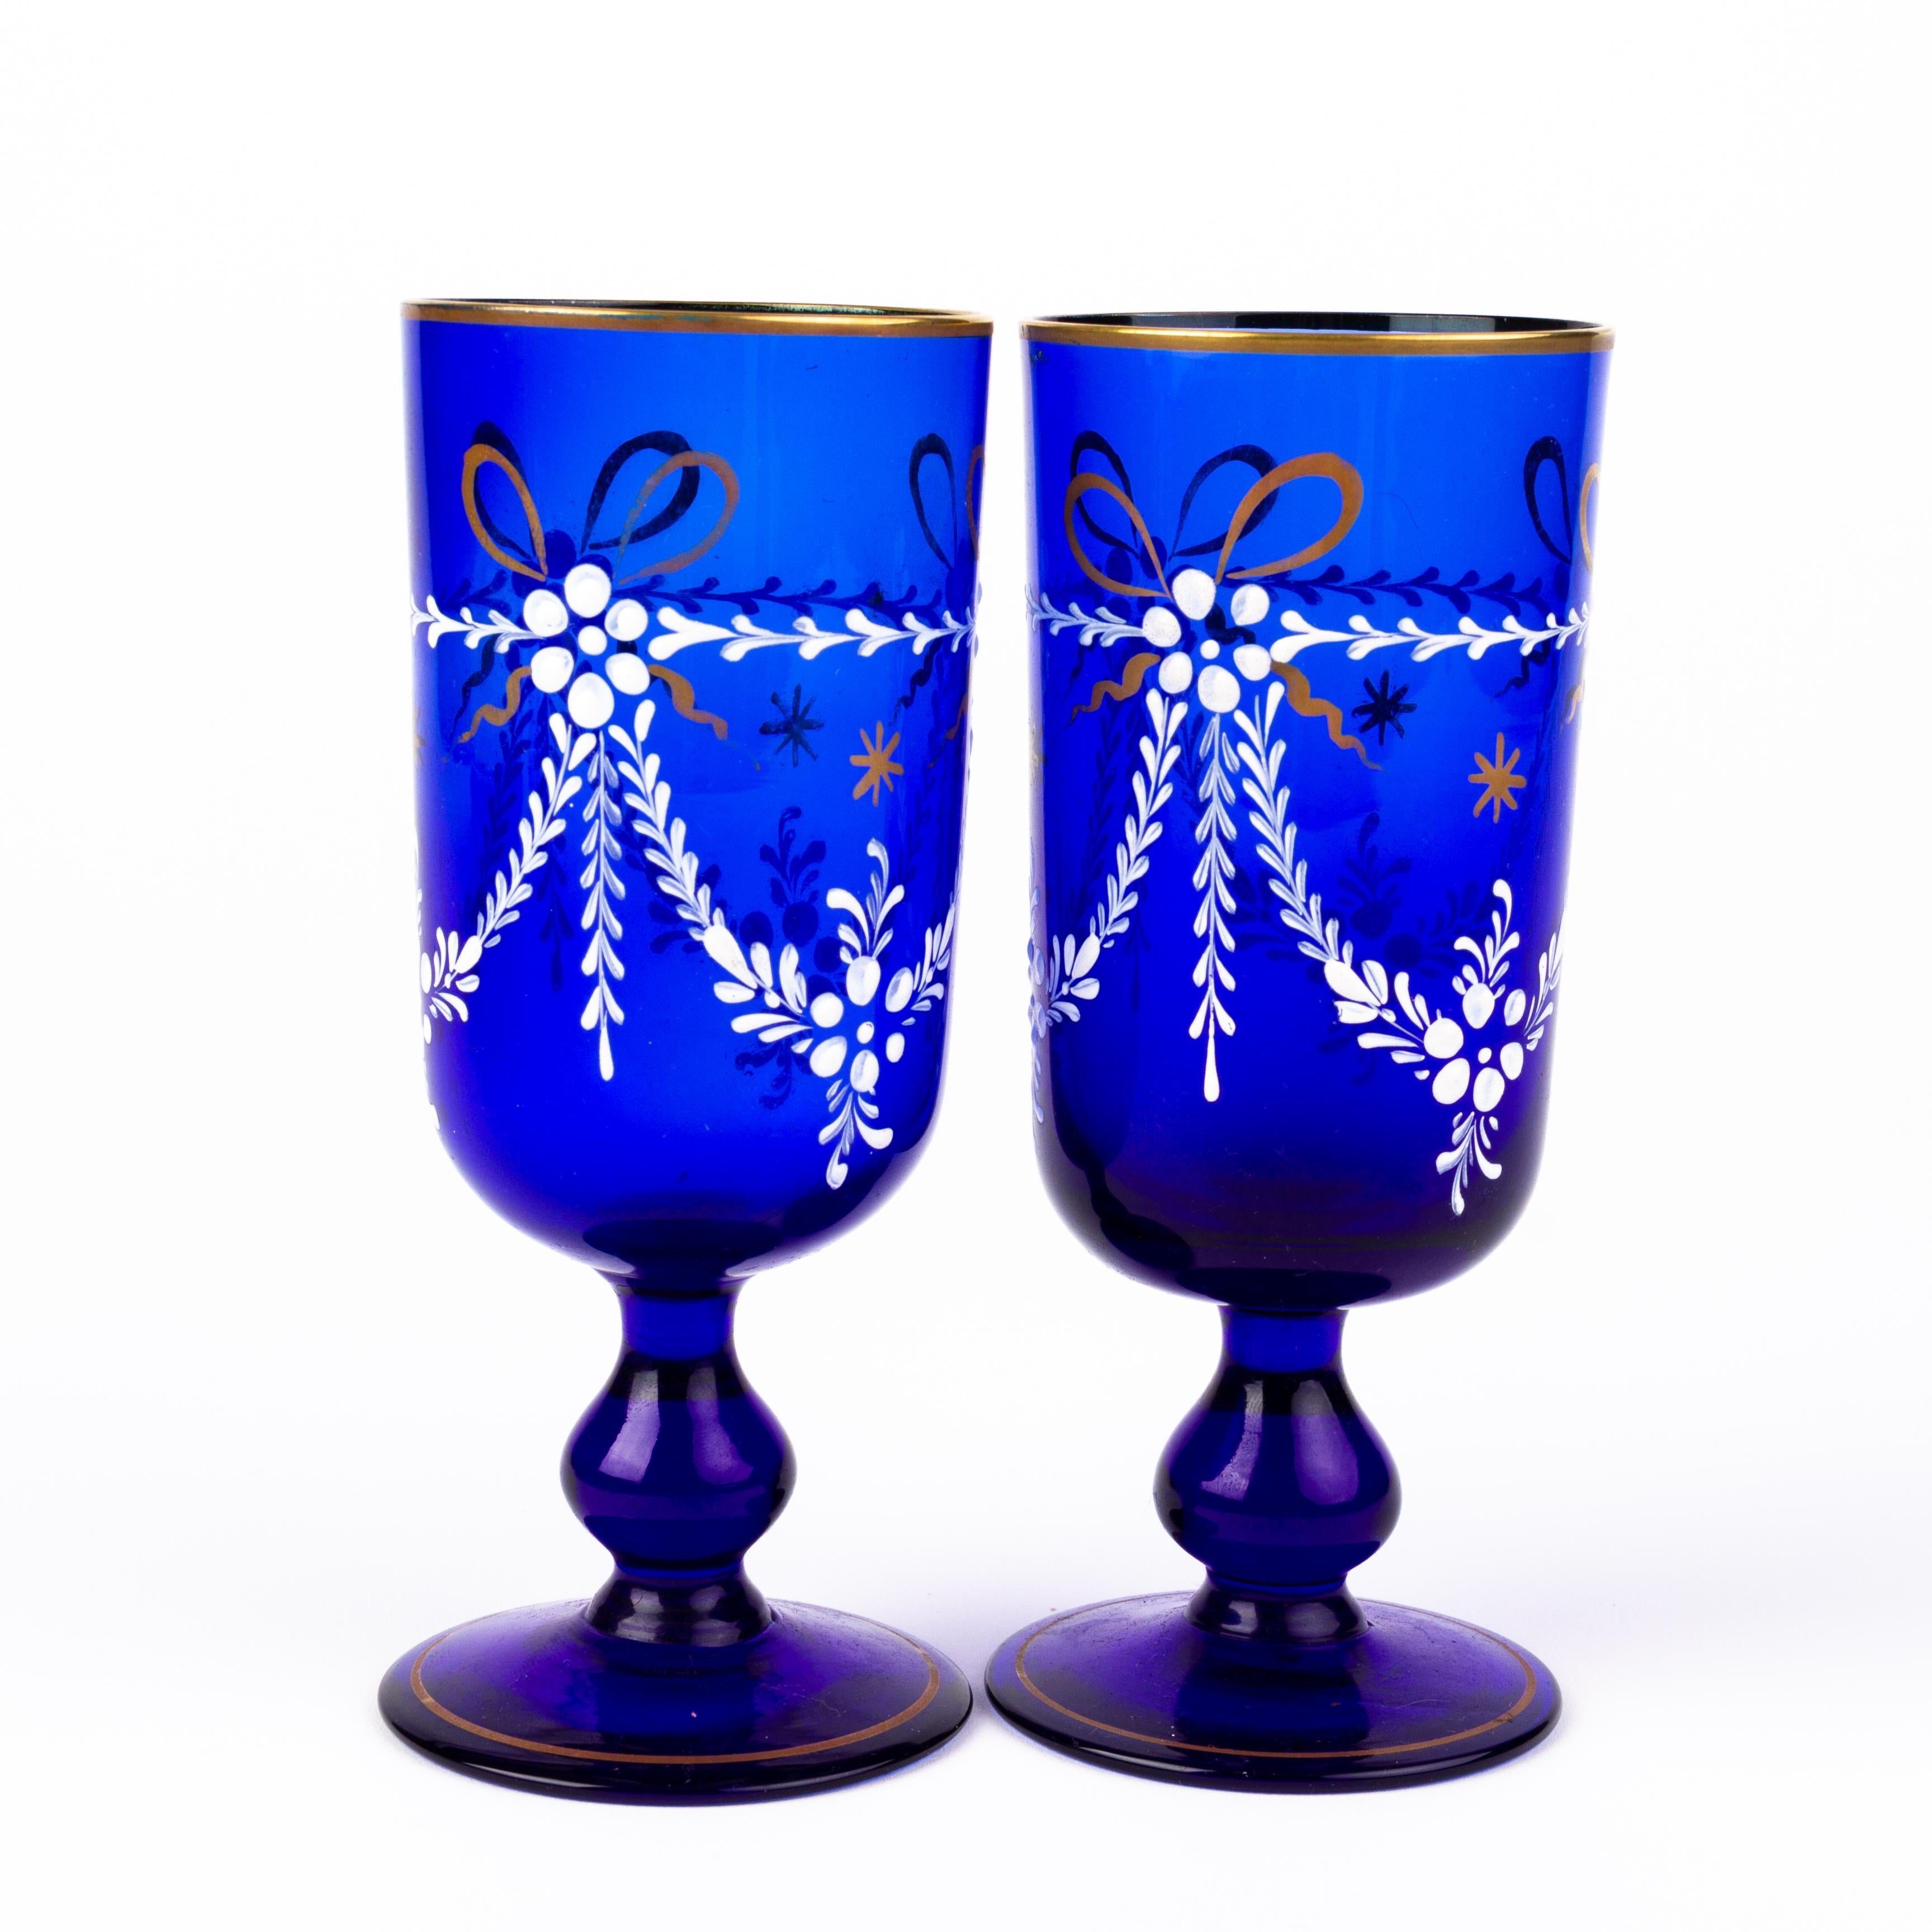 In good condition
From a private collection
Victorian Bristol Blue Enamel Painted Glasses 19th Century